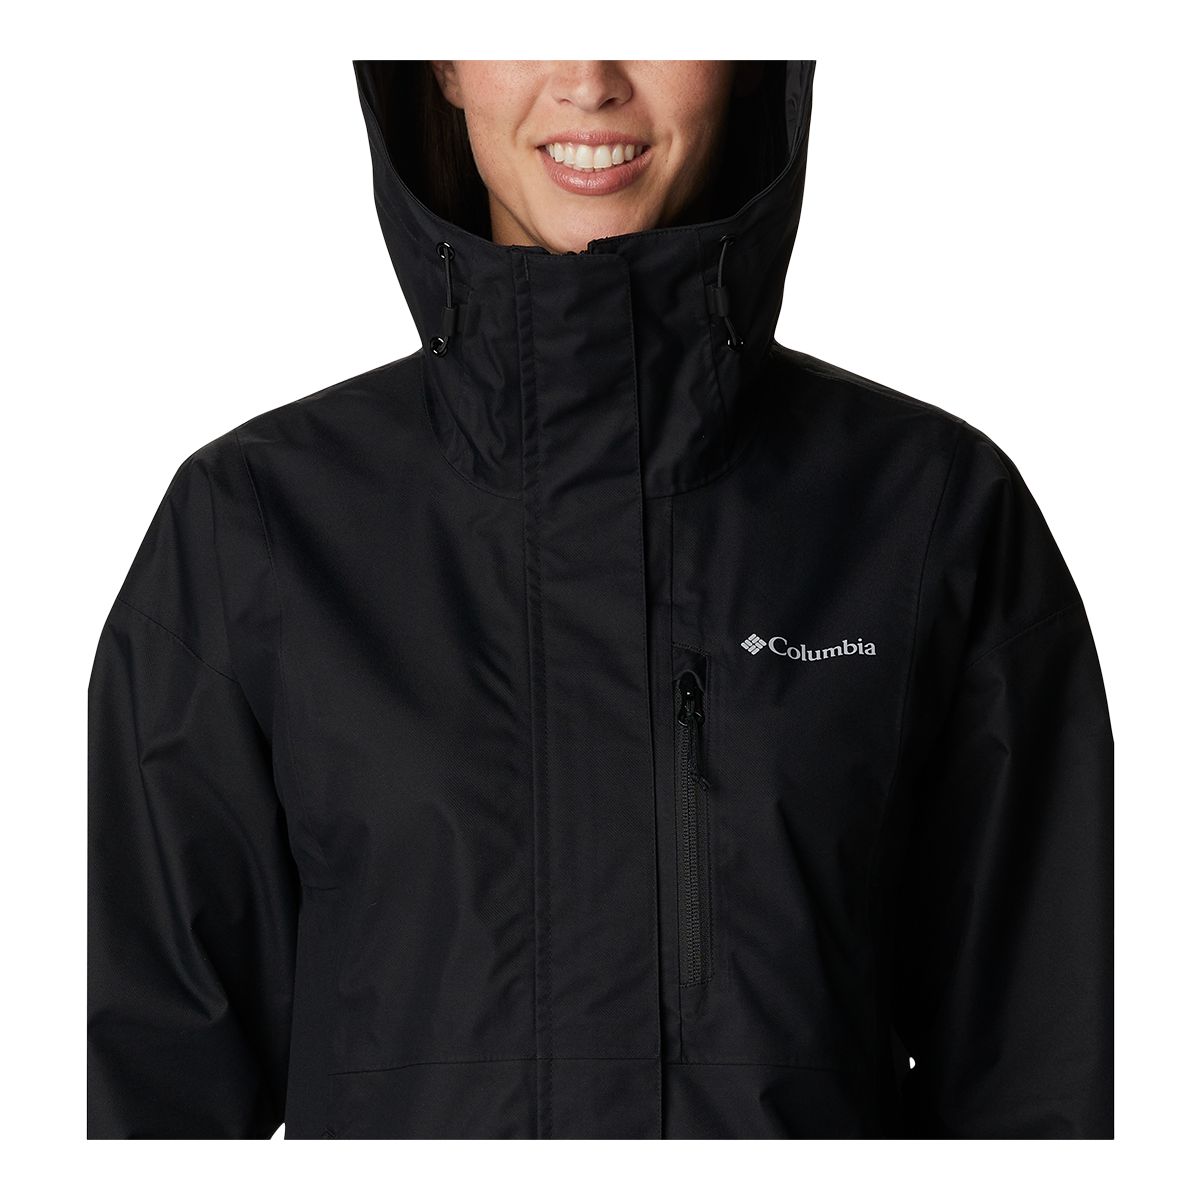 Women's Hikebound™ Long Insulated Jacket